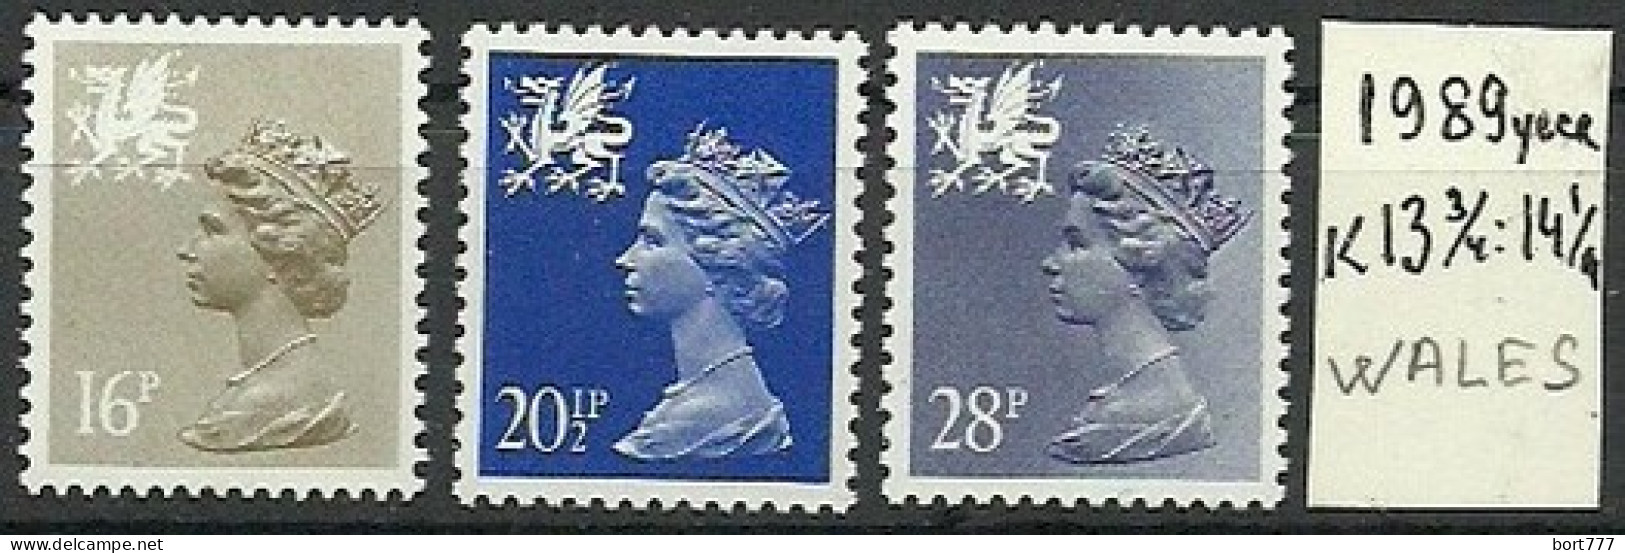 Wales 1989 Year, Mint Stamps MNH(**) Set  - Colecciones Completas